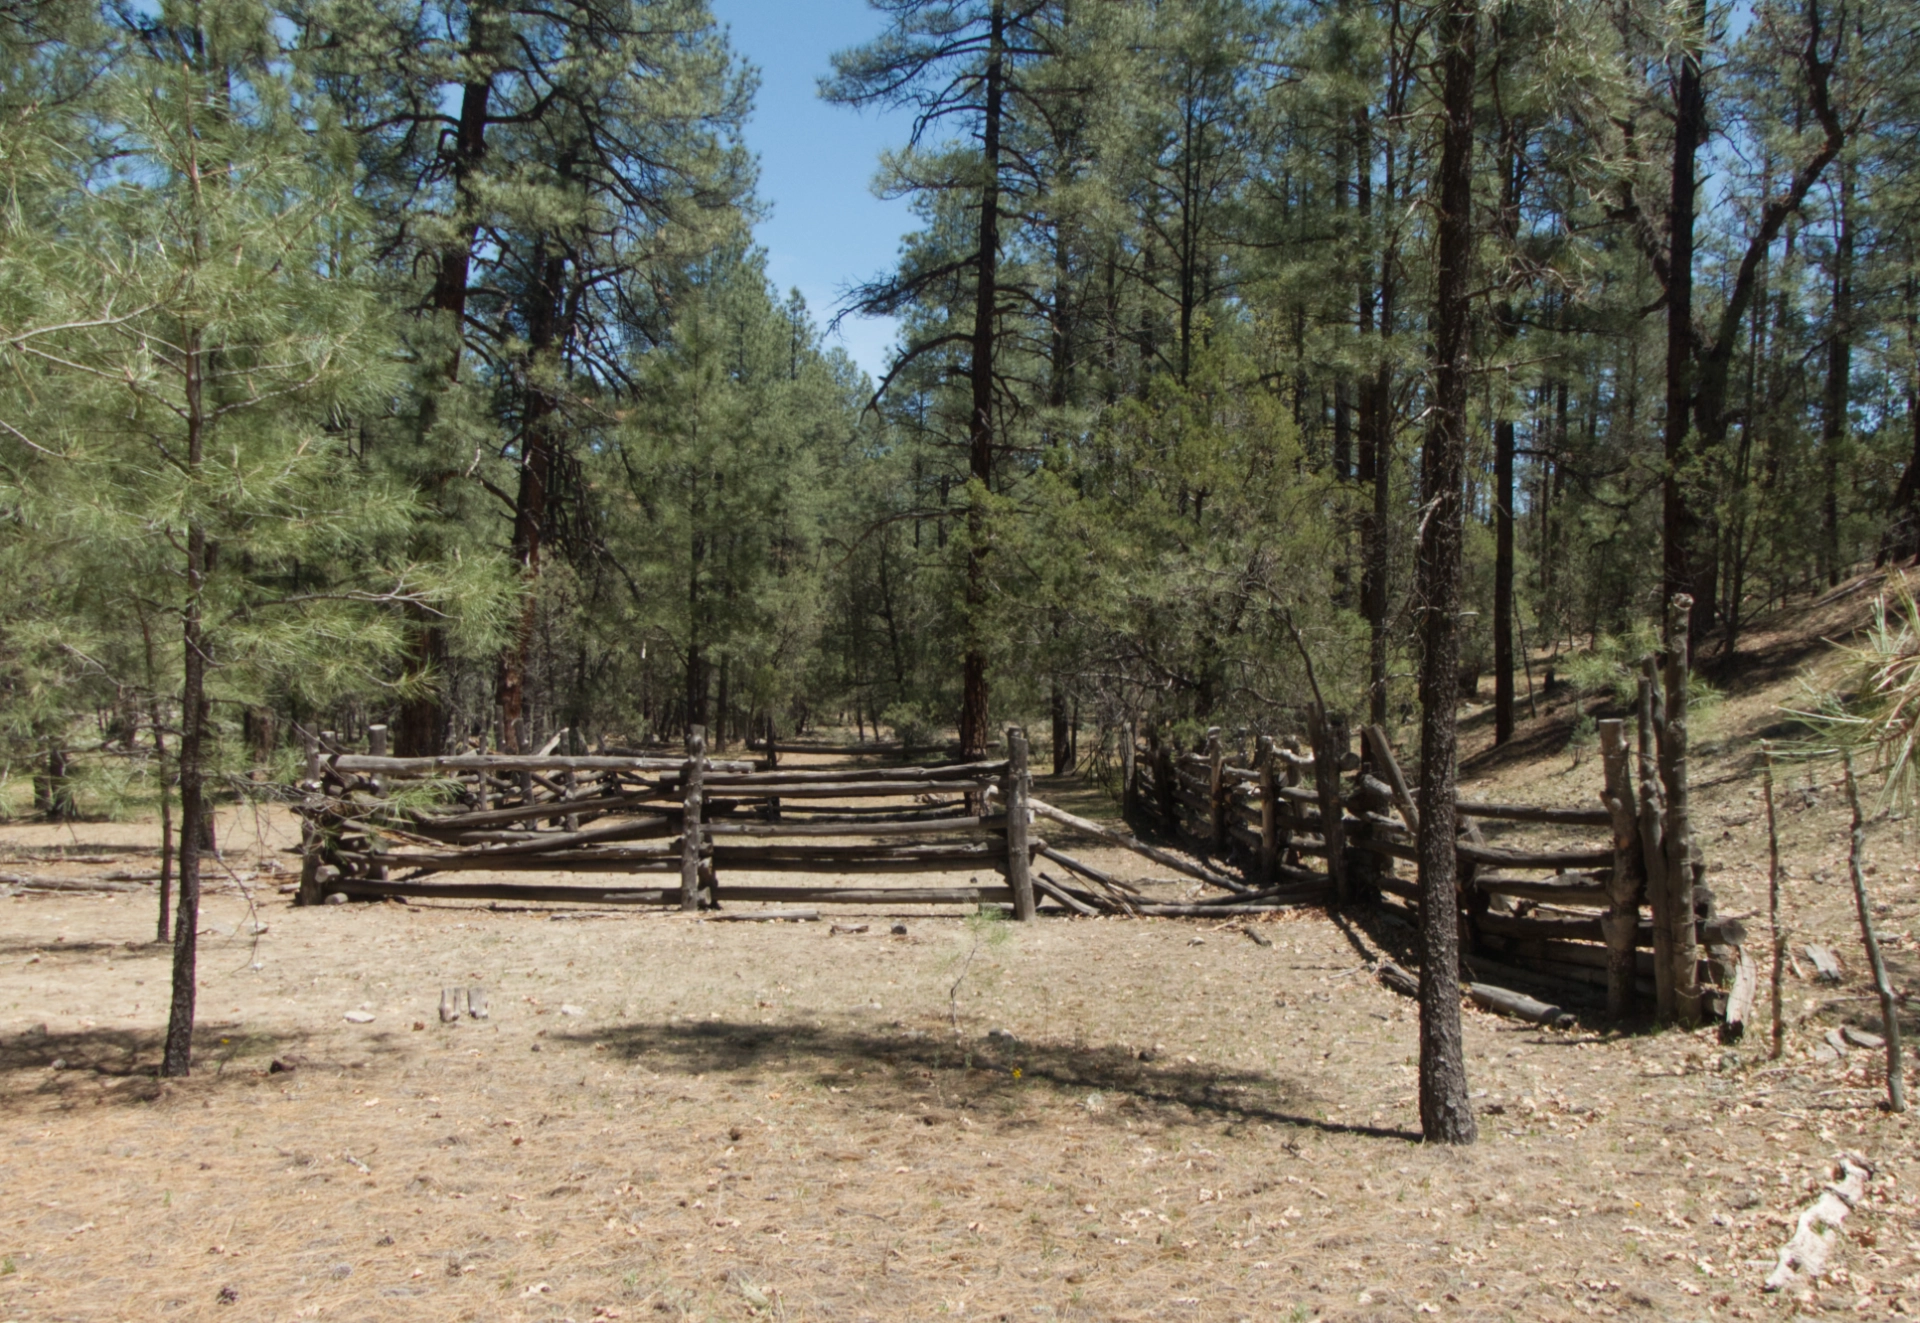 old wooden corral